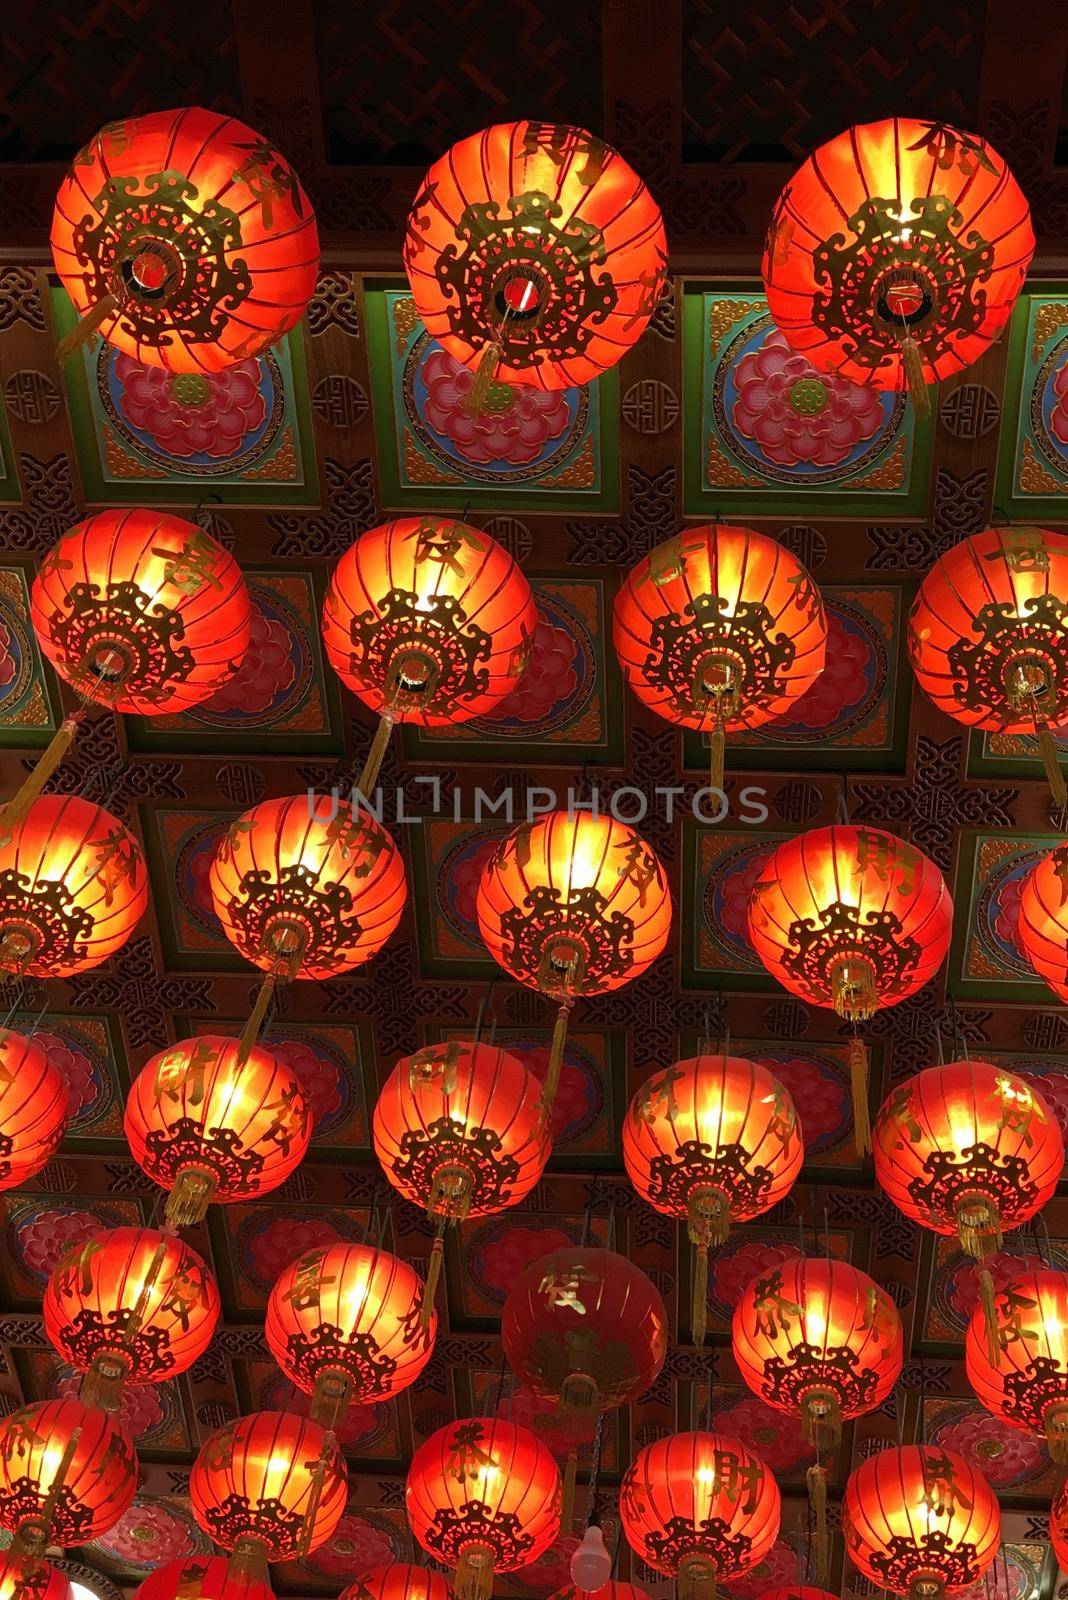 Chinese Red lanterns in china town preparation for the upcoming Chinese New Year by Nuamfolio